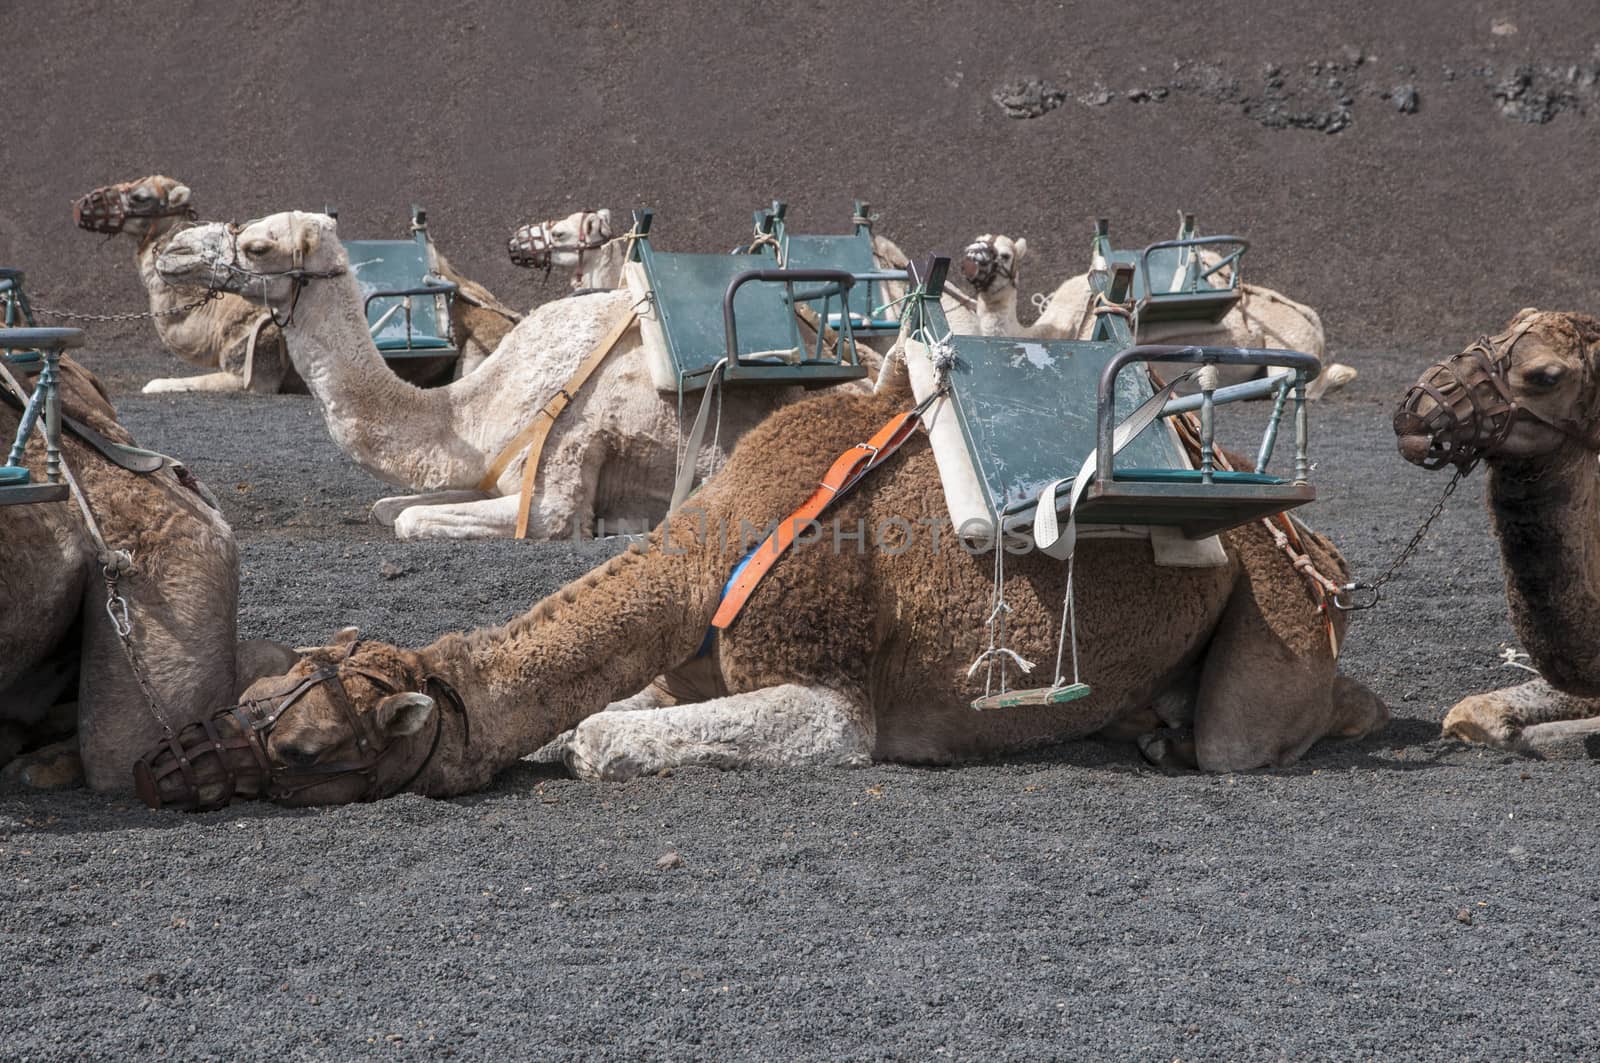 camels used for walking tours people contracted